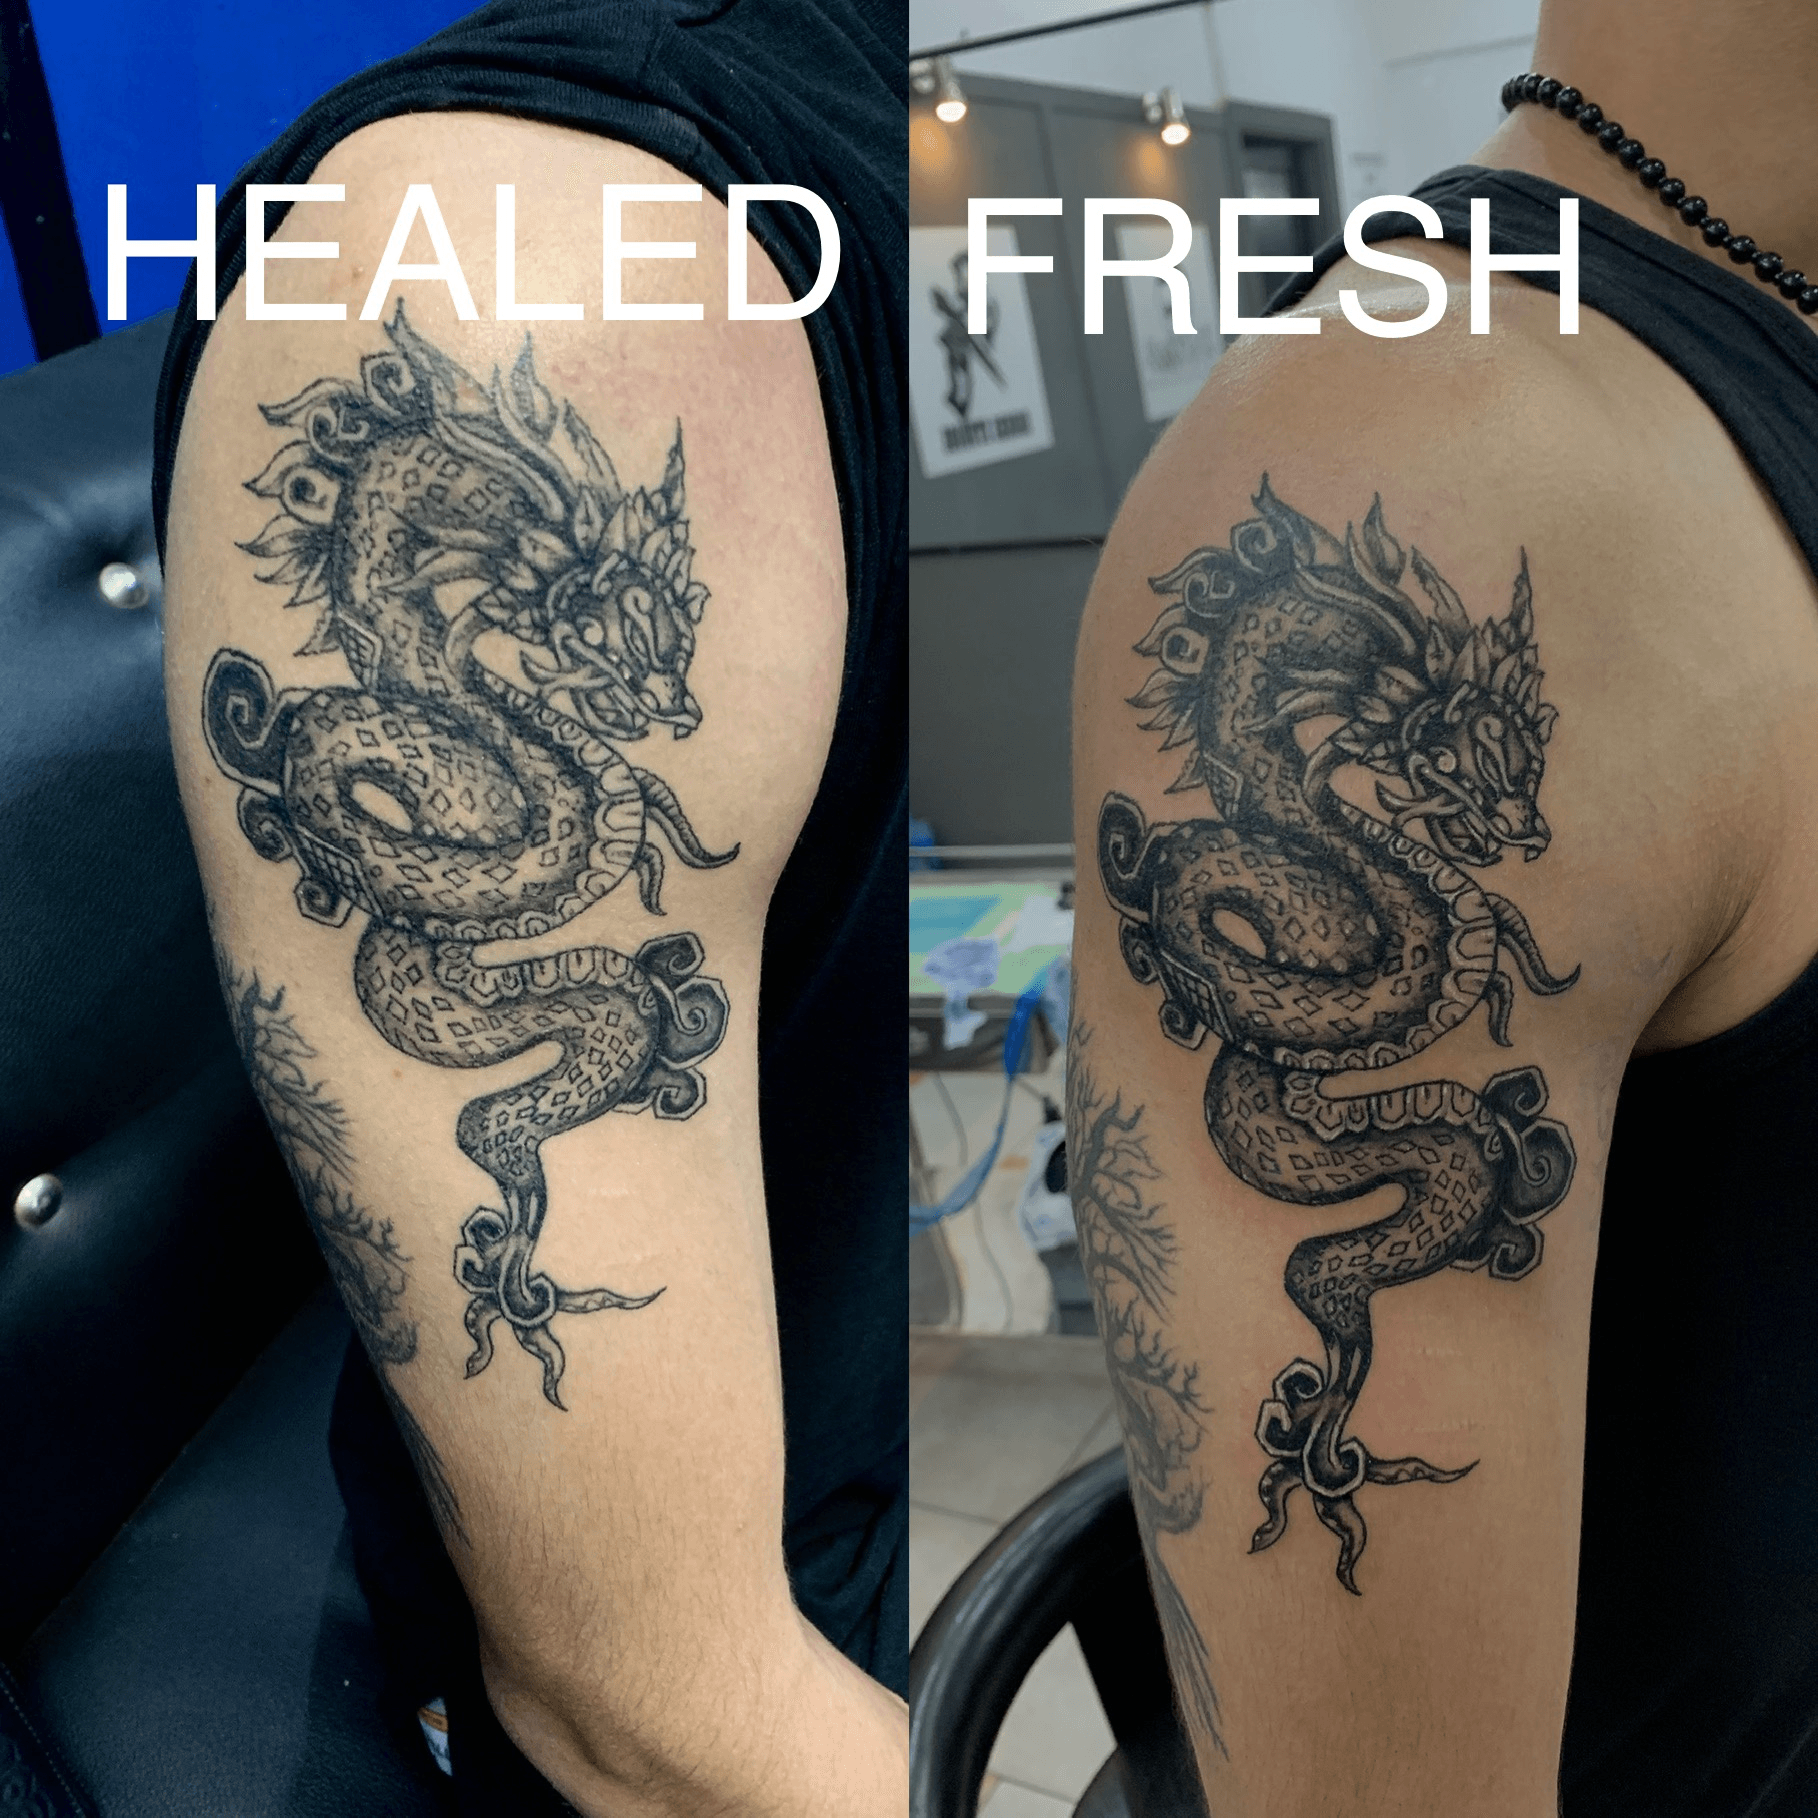 No filter no tricks pic taken under the same light conditions in the same  corner the healed picture is of a very freshly healed tattoo so i will  tone down a touch